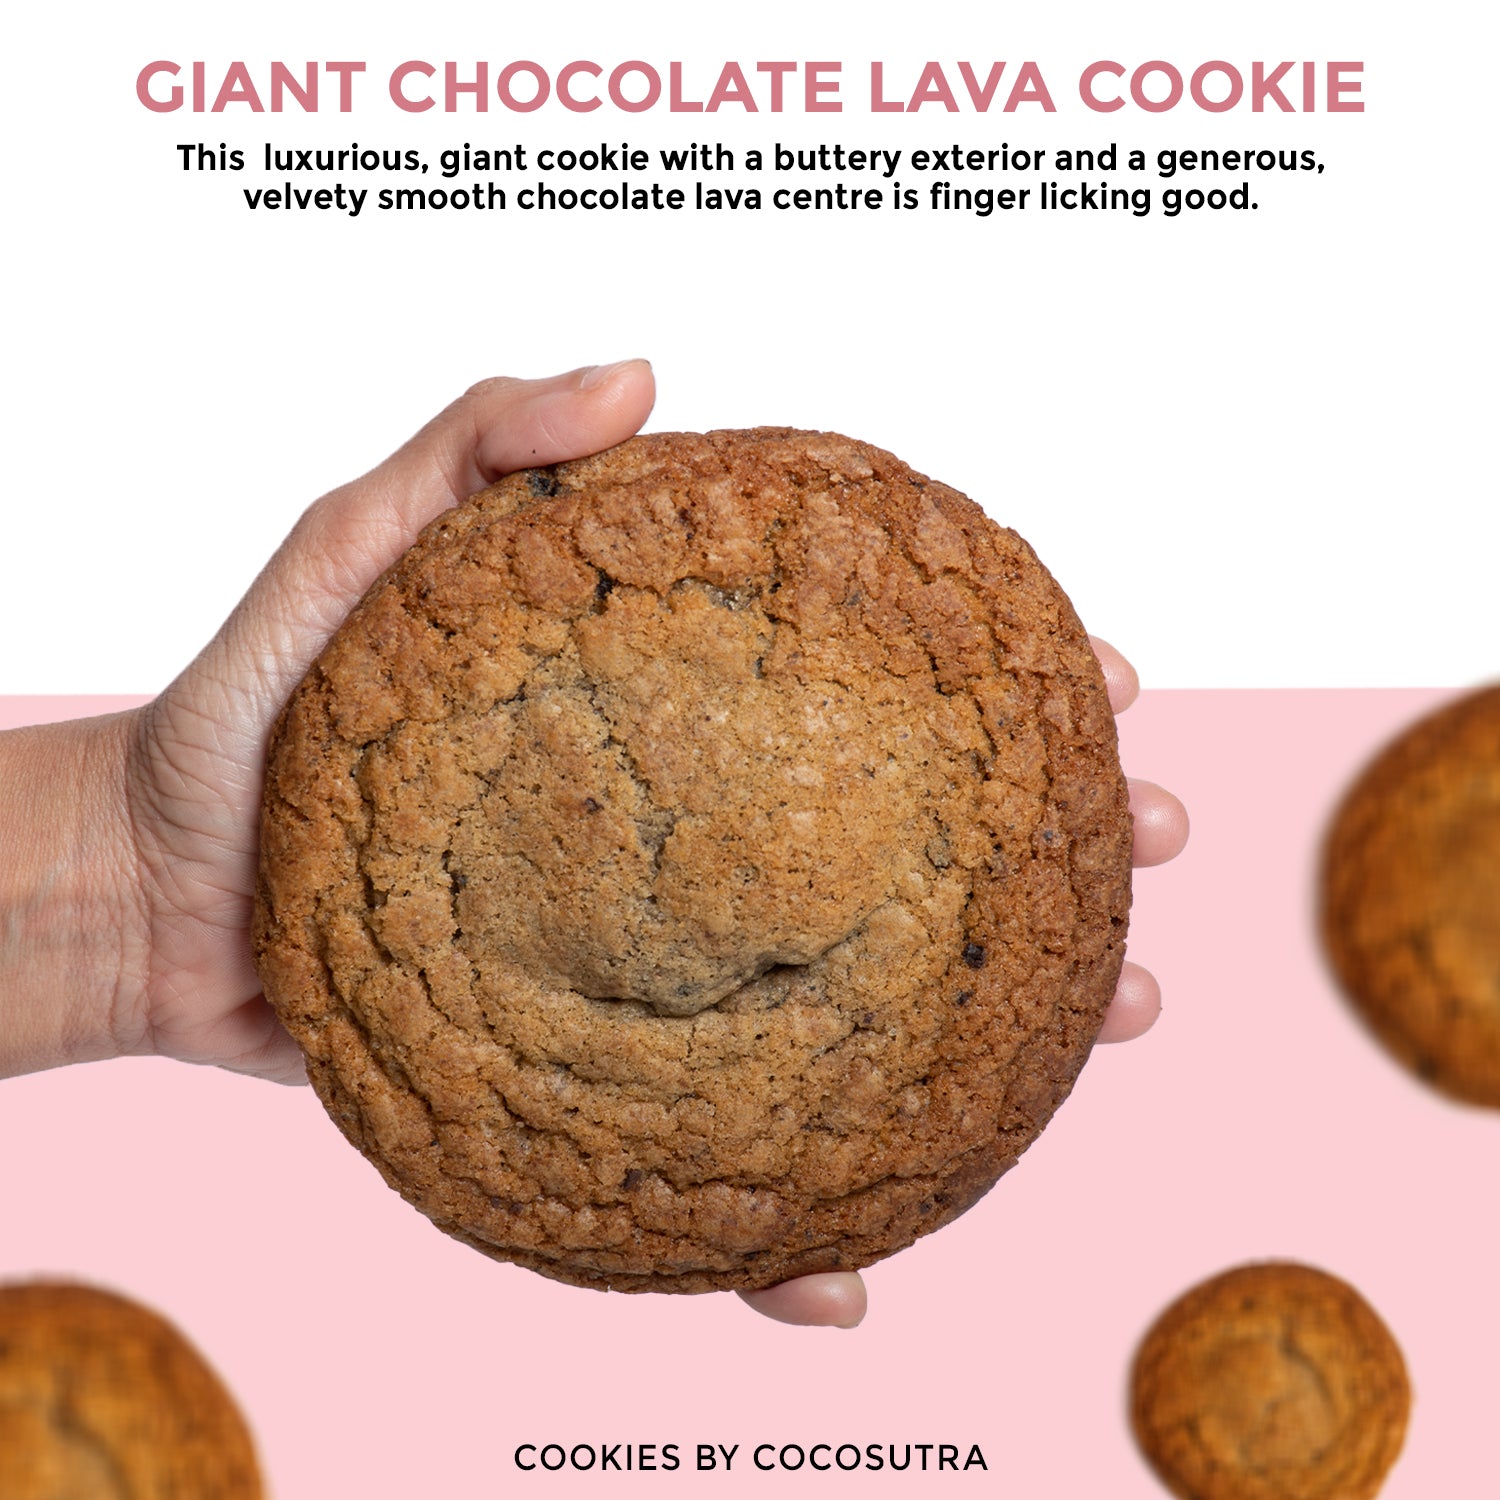 Cocosutra Giant Chocolate Lava Cookies